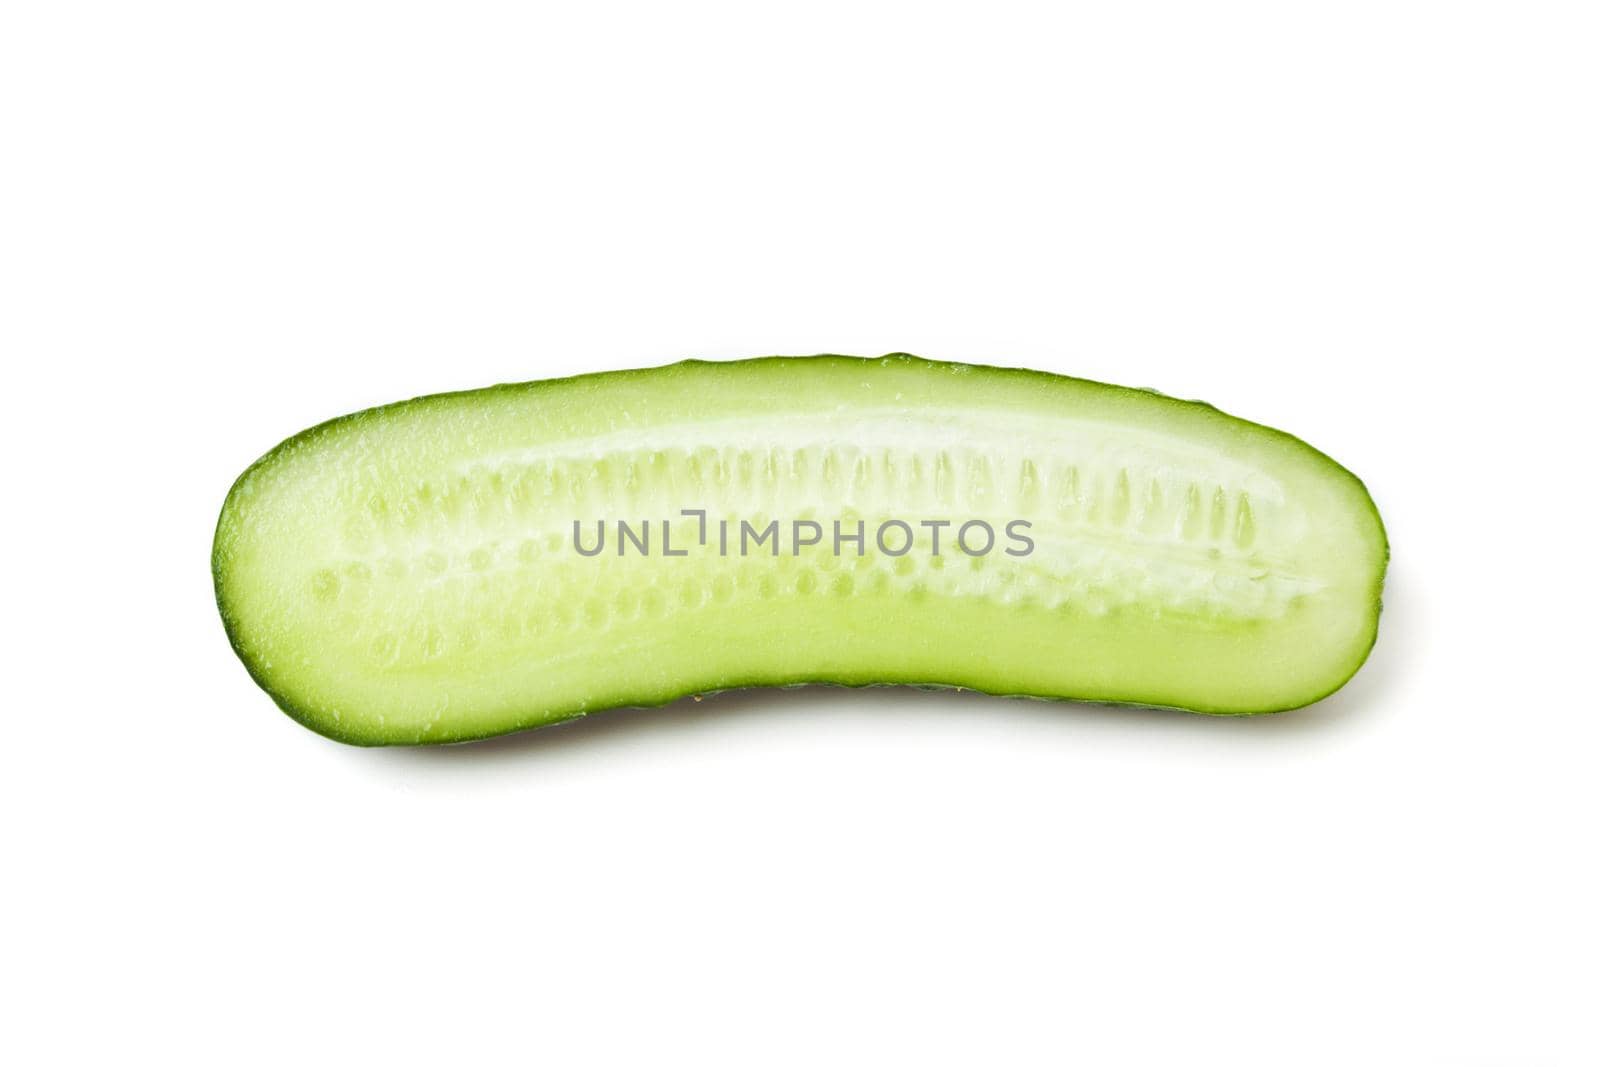 One halve of fresh green cucumber isolated on a white background